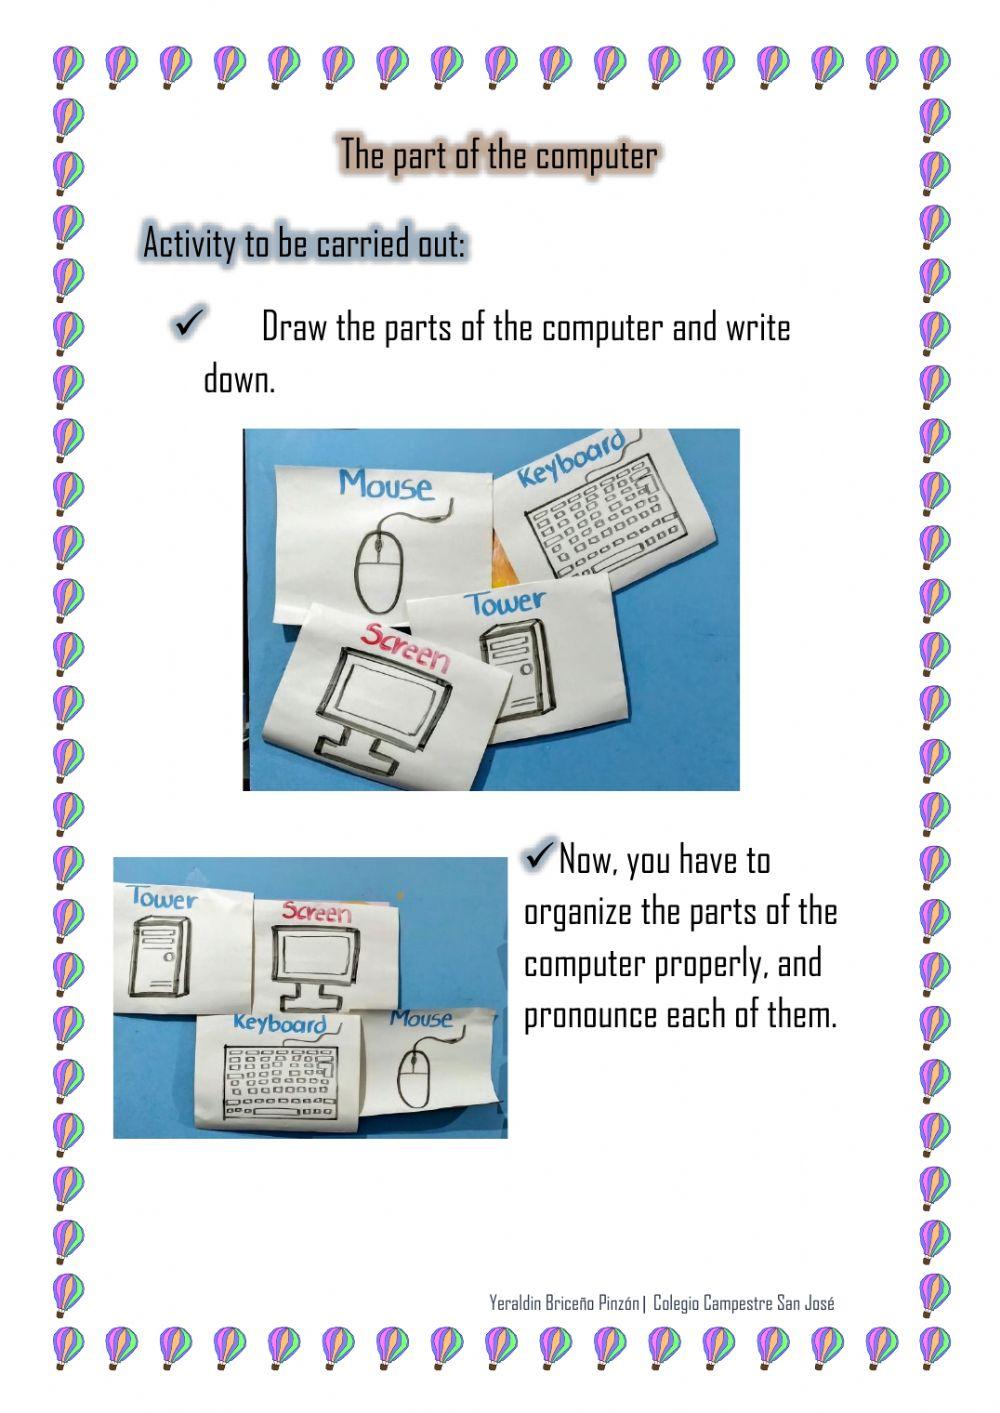 The parts of the computer